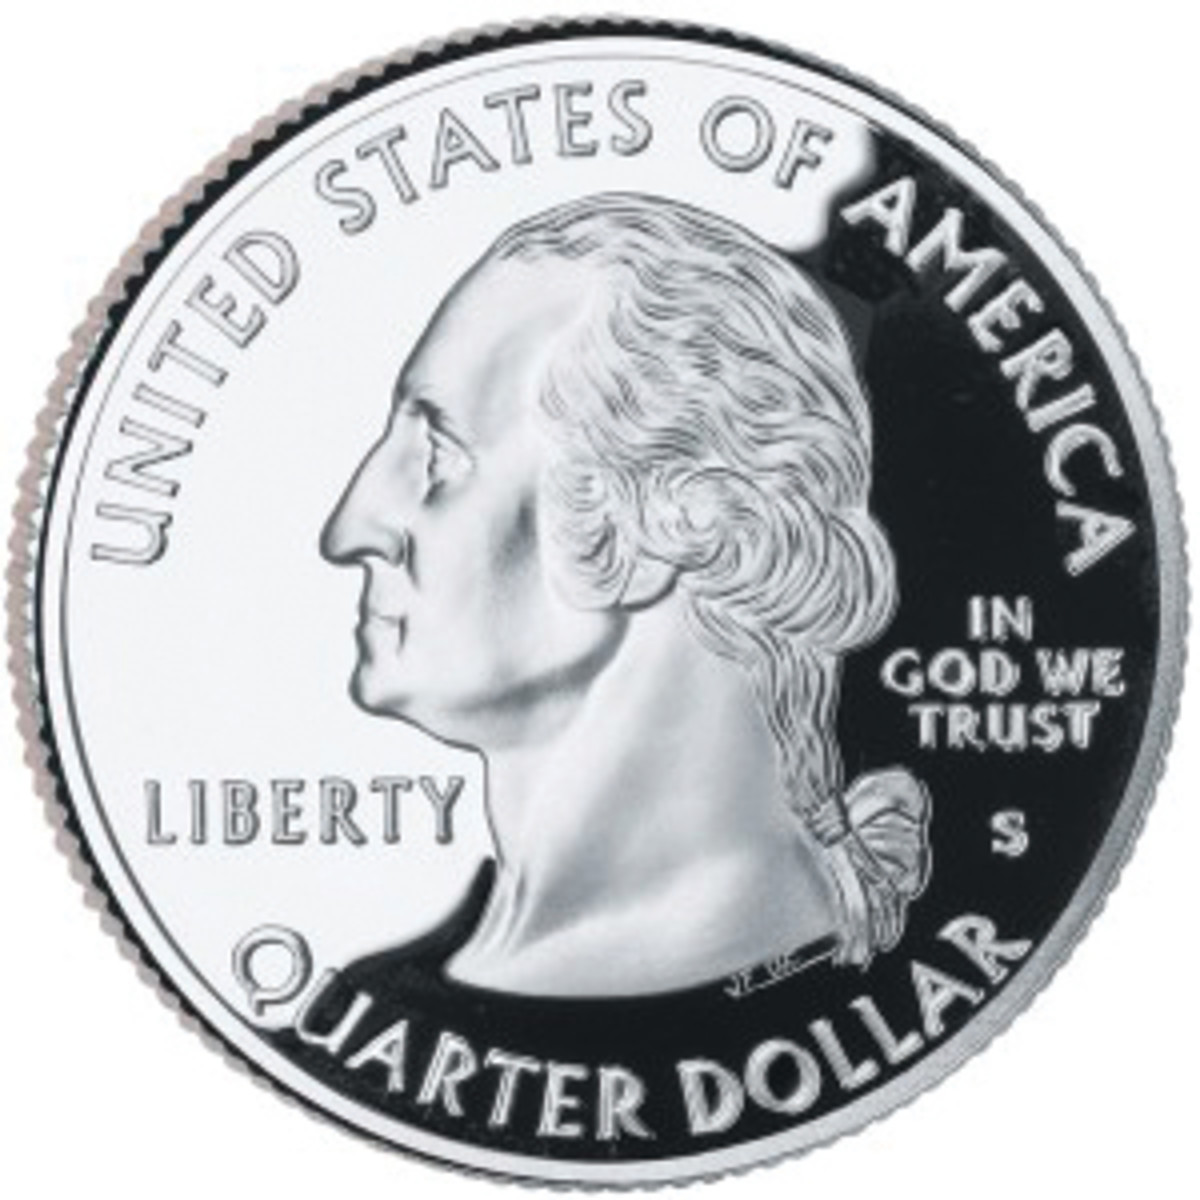 The standard obverse design for the quarter which has been used since 1932. (Images courtesy of the U.S. Mint)